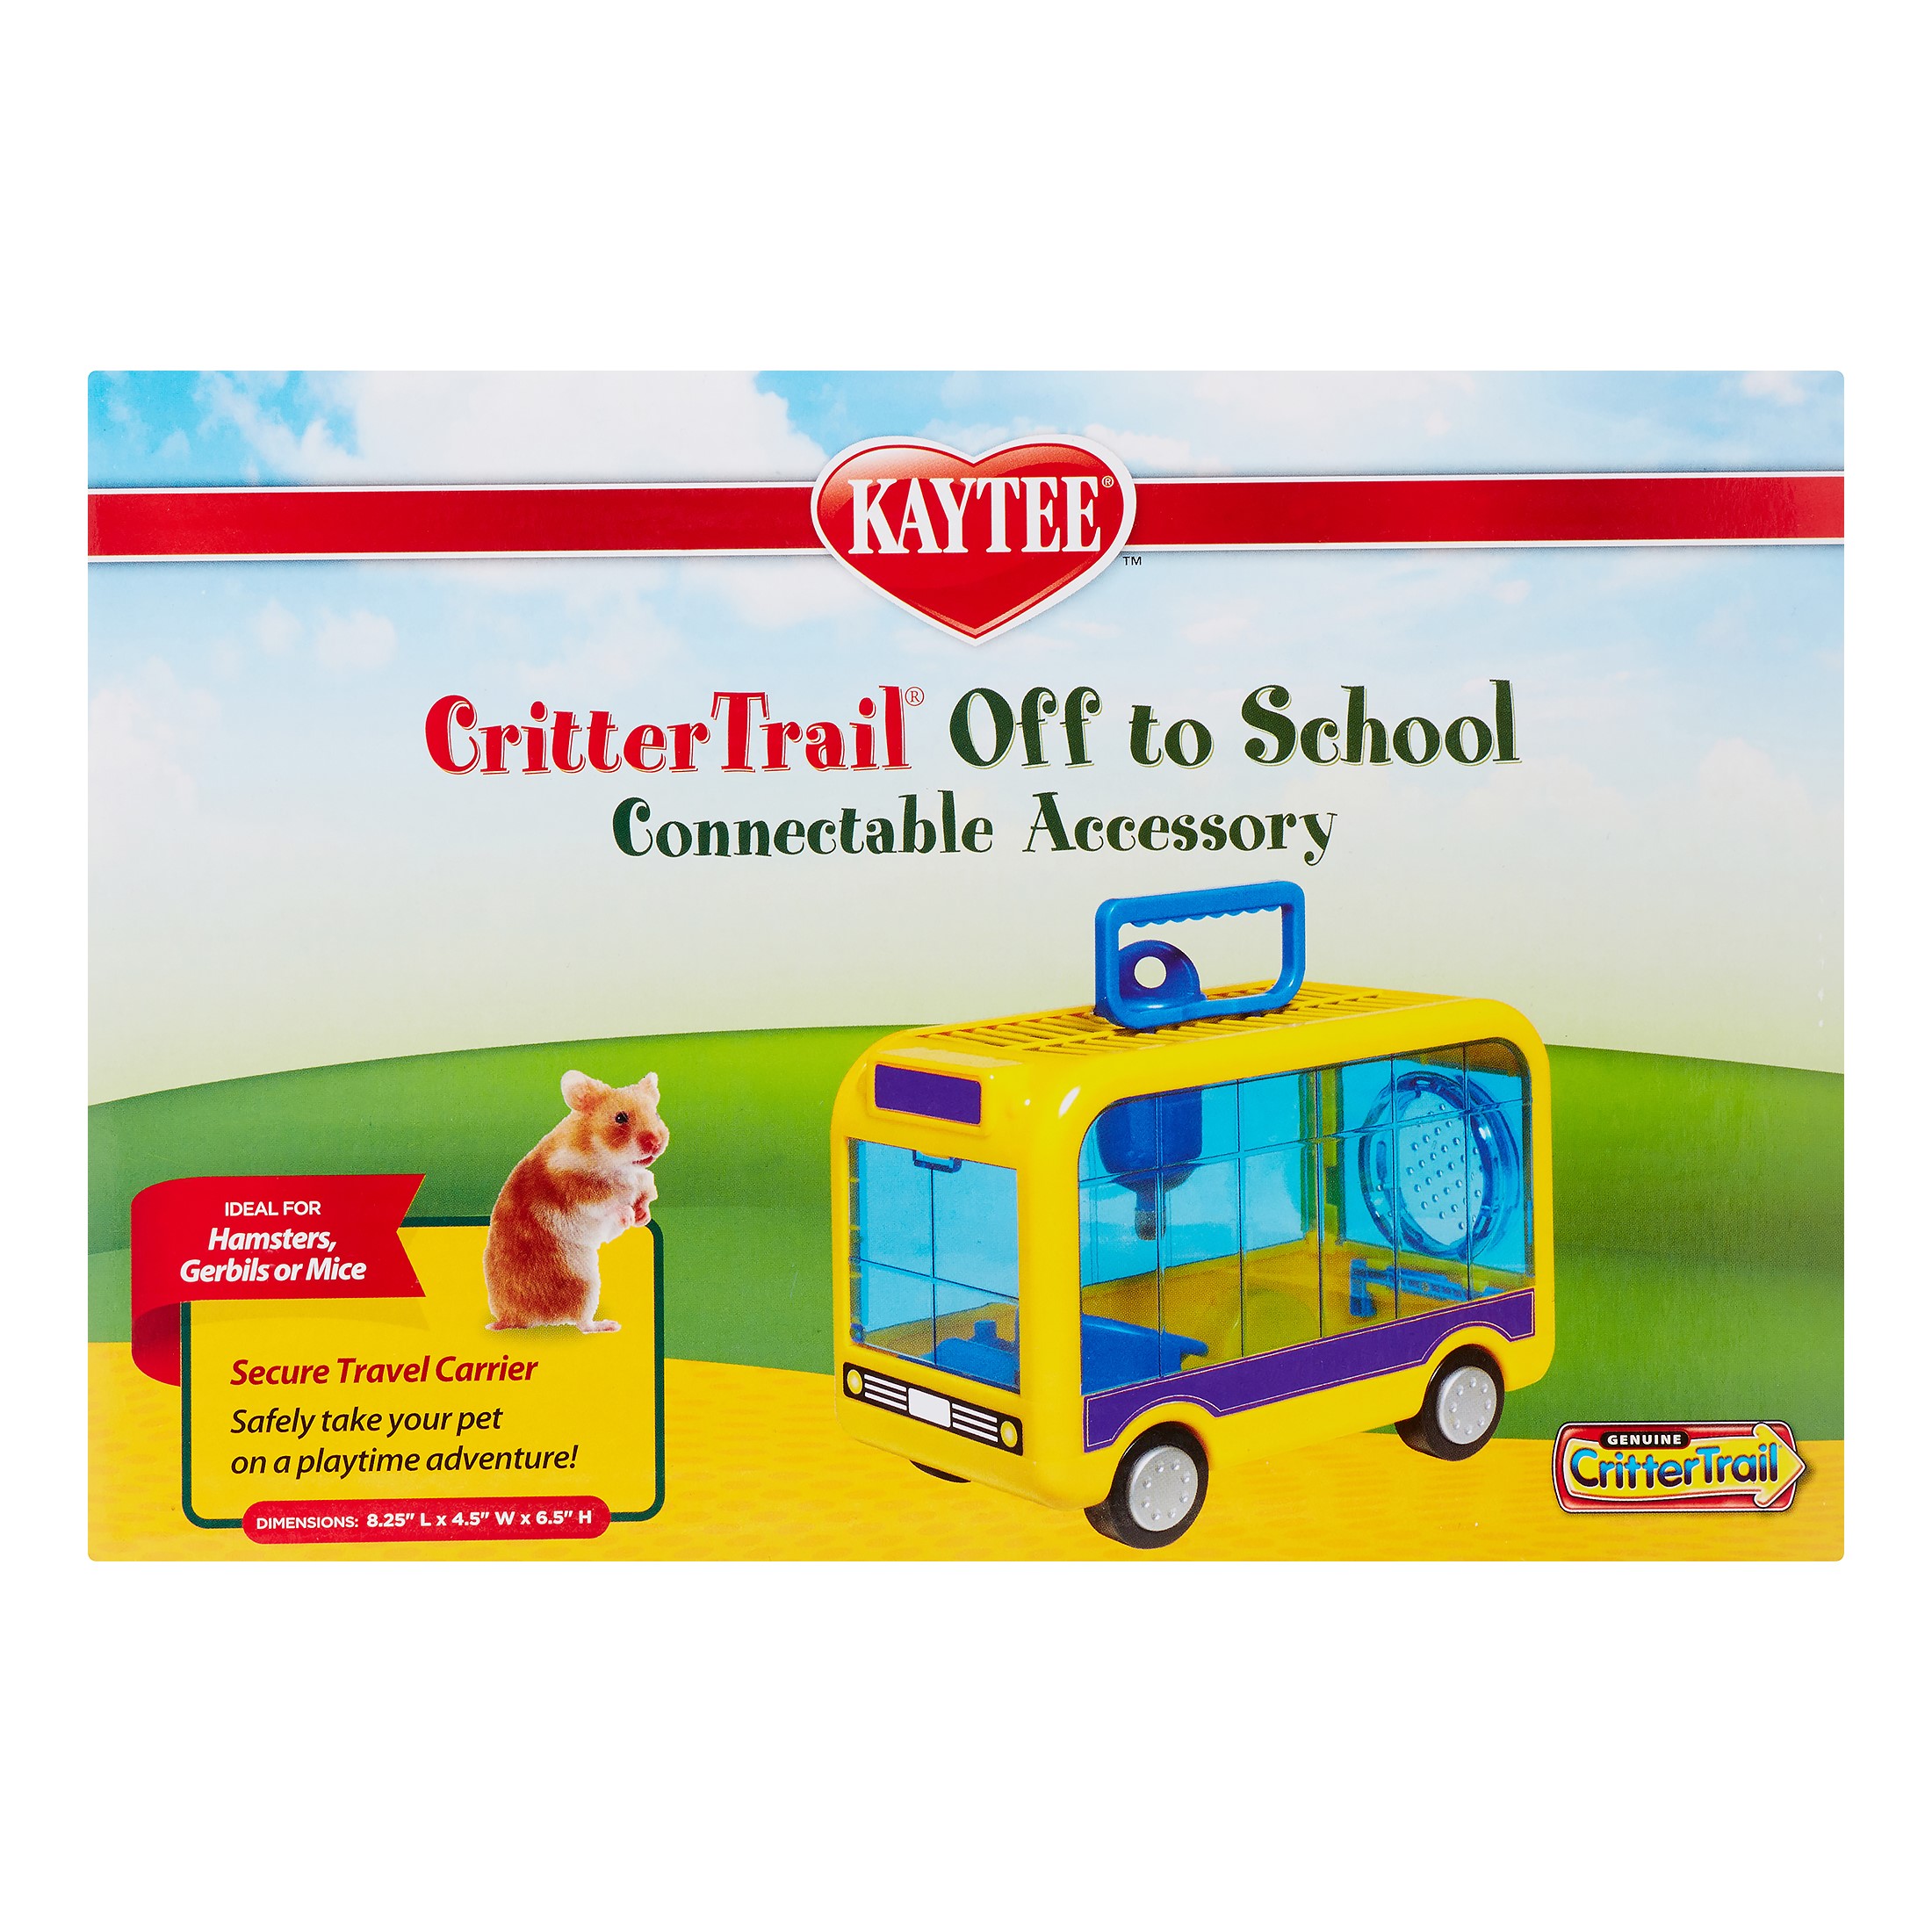 Kaytee CritterTrail Off to School Small Animal Habitat, Small, Assorted Colors - image 1 of 2